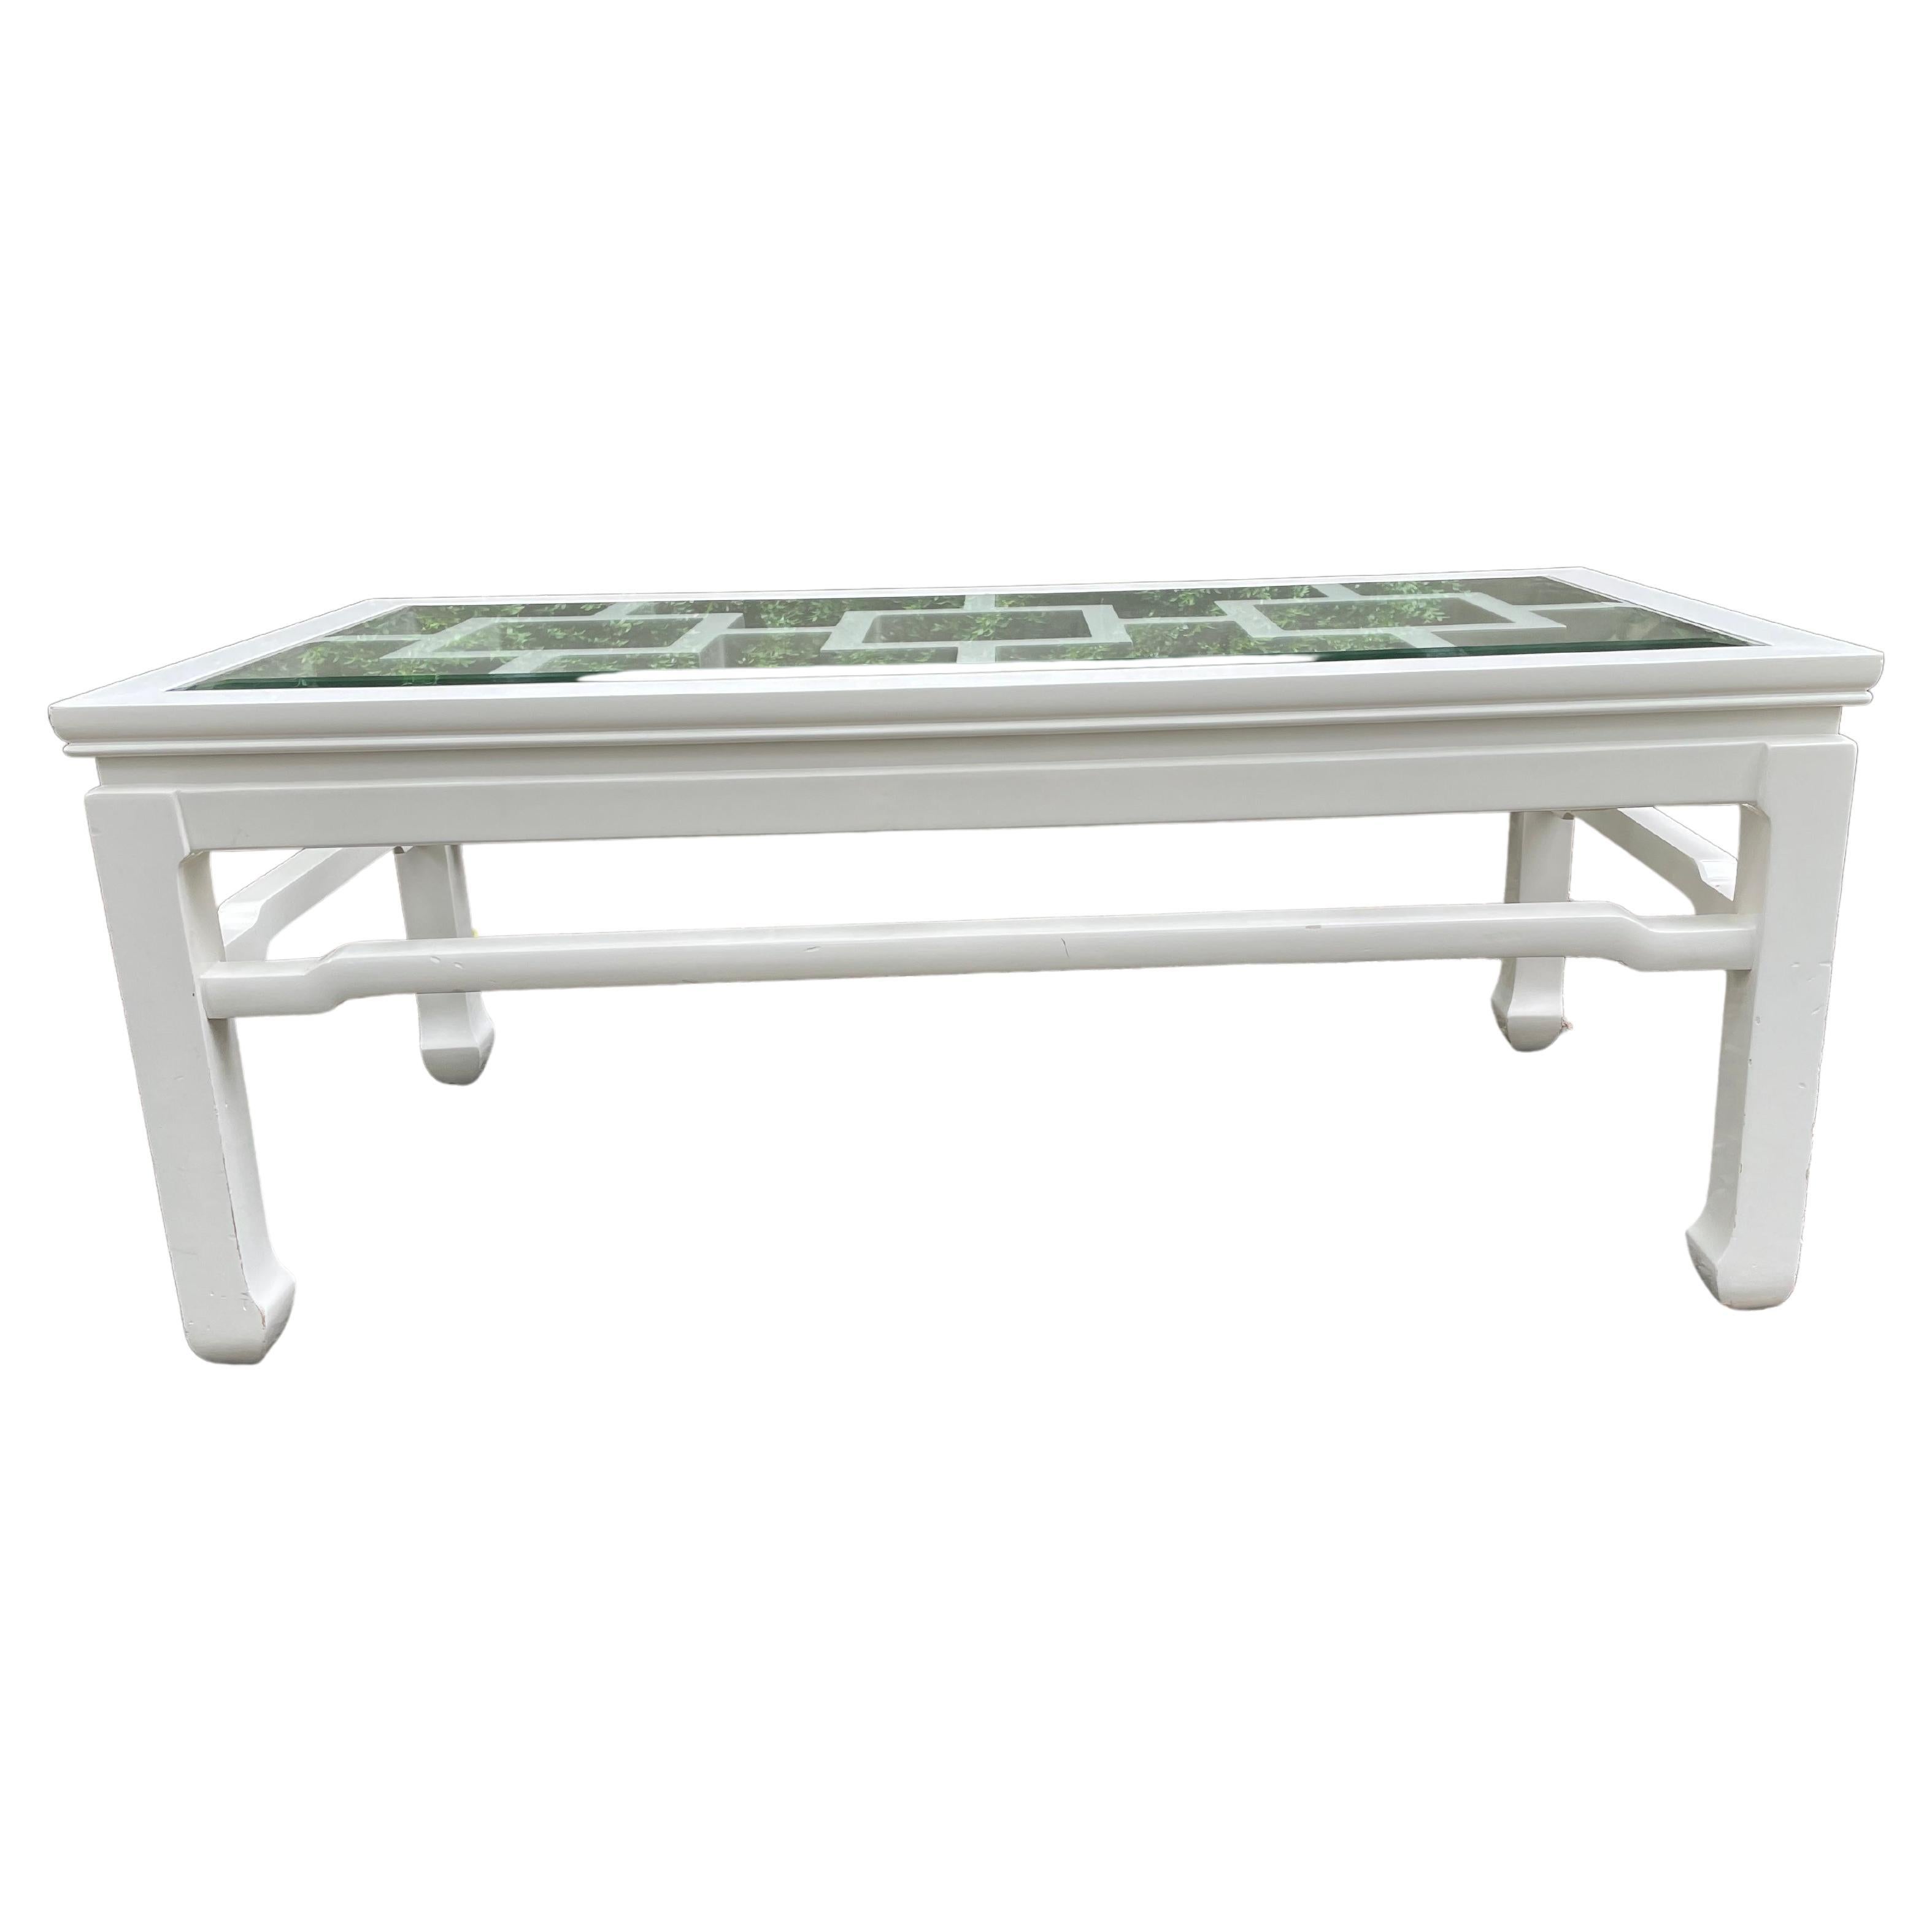 Very chic contemporary white lacquer coffee table with bevelled glass top having an Asian inspired design. The geometric motif visible through the top is marvelous.